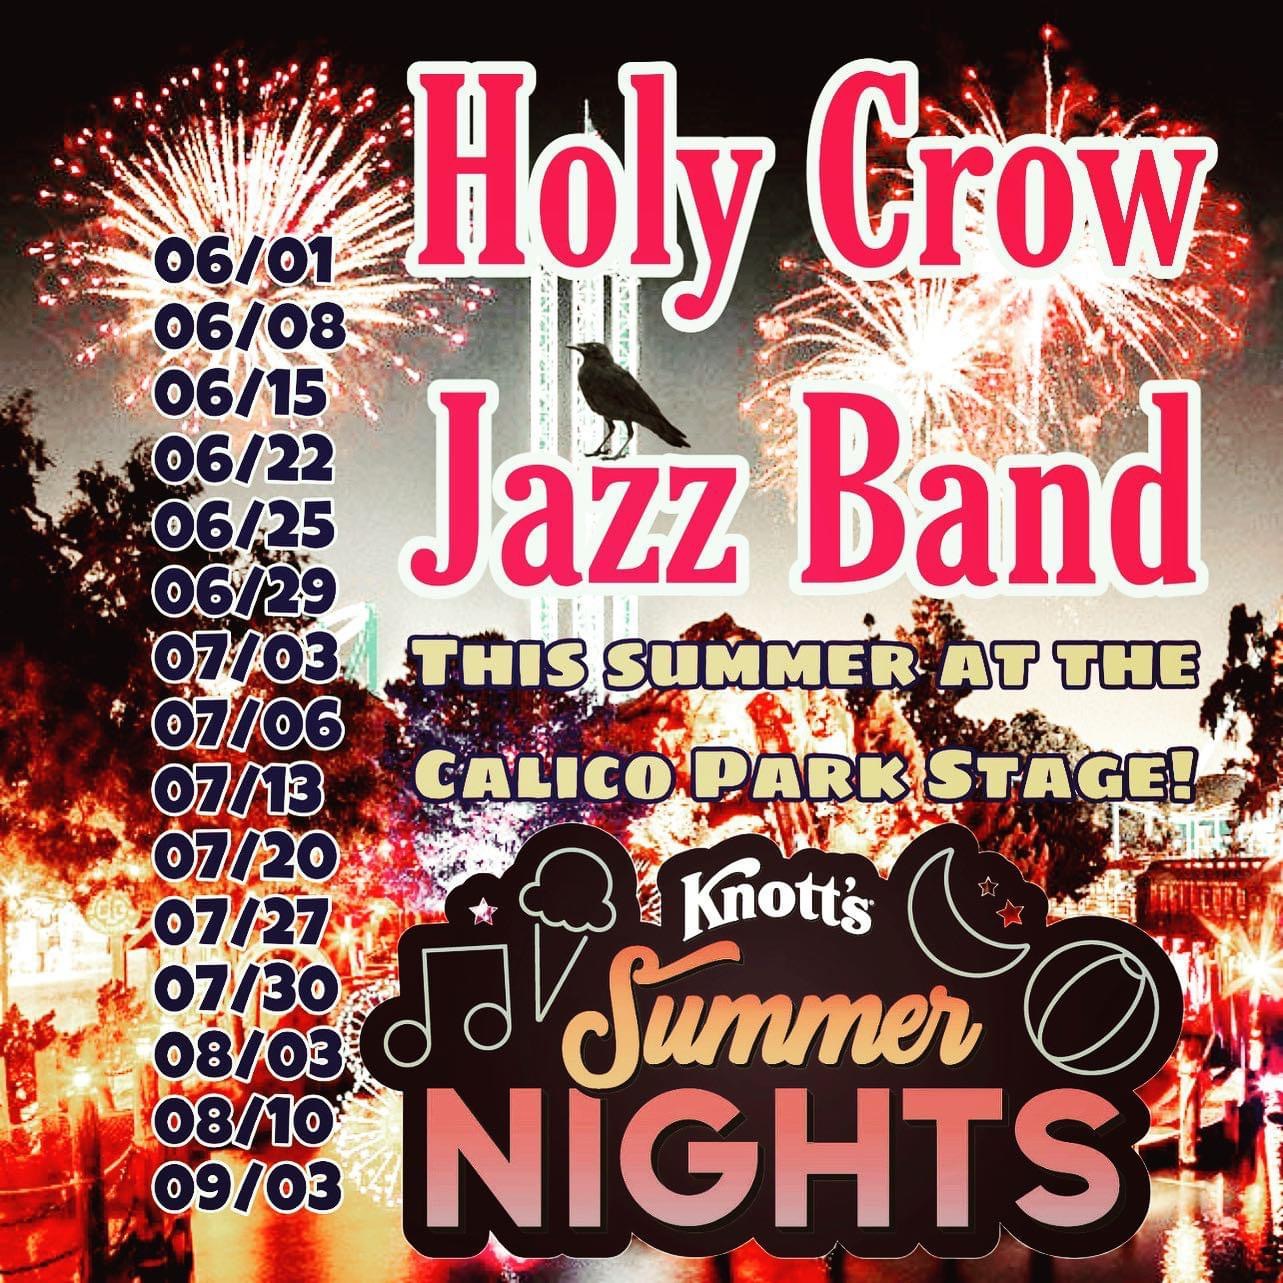 Knotts Summer Nights with the Holy Crow Jazz Band 7:30PM-9:30PM